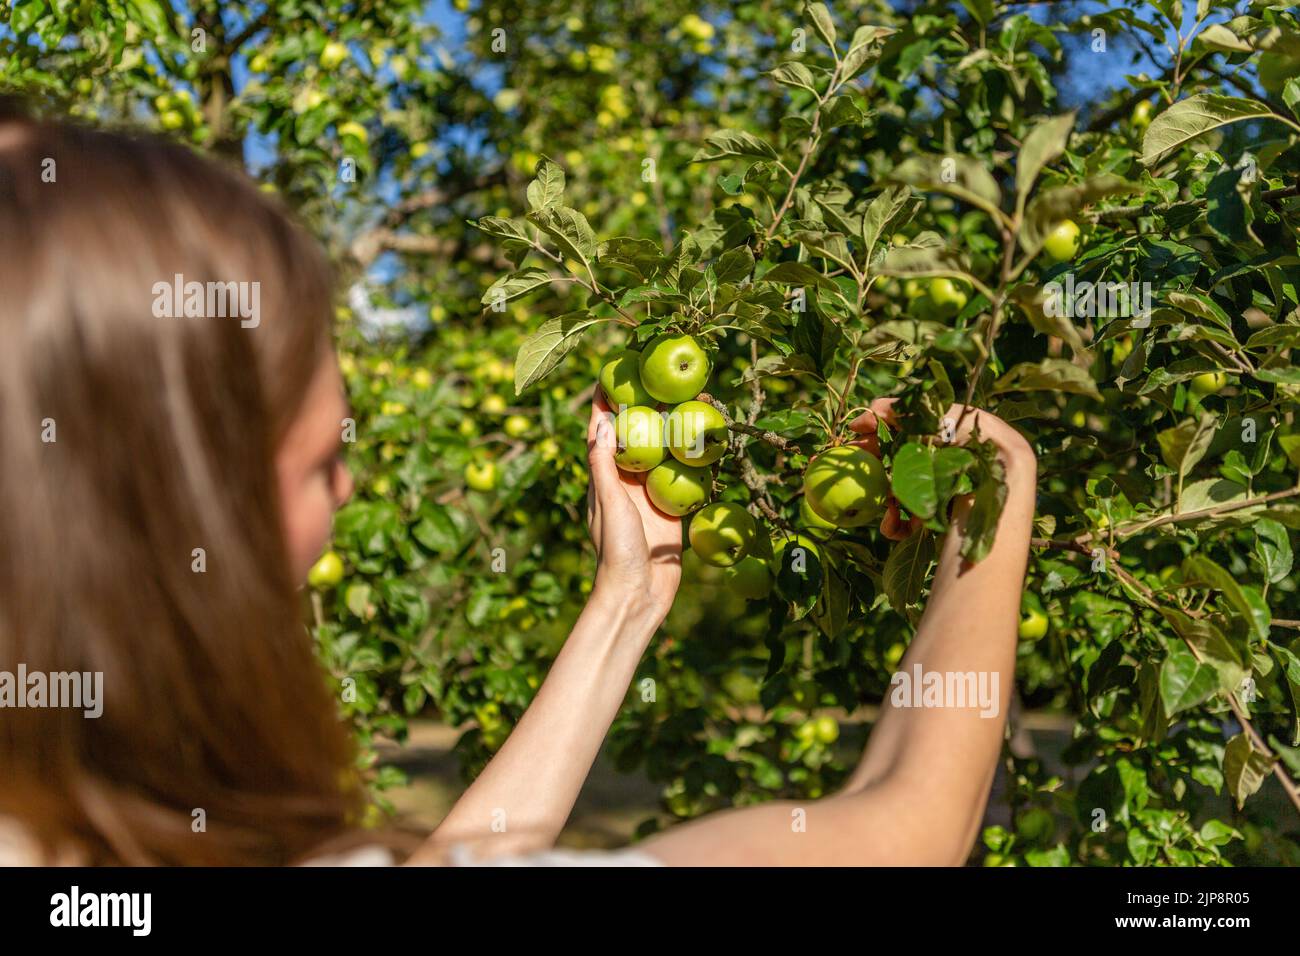 Woman collecting green apples from the tree. Stock Photo